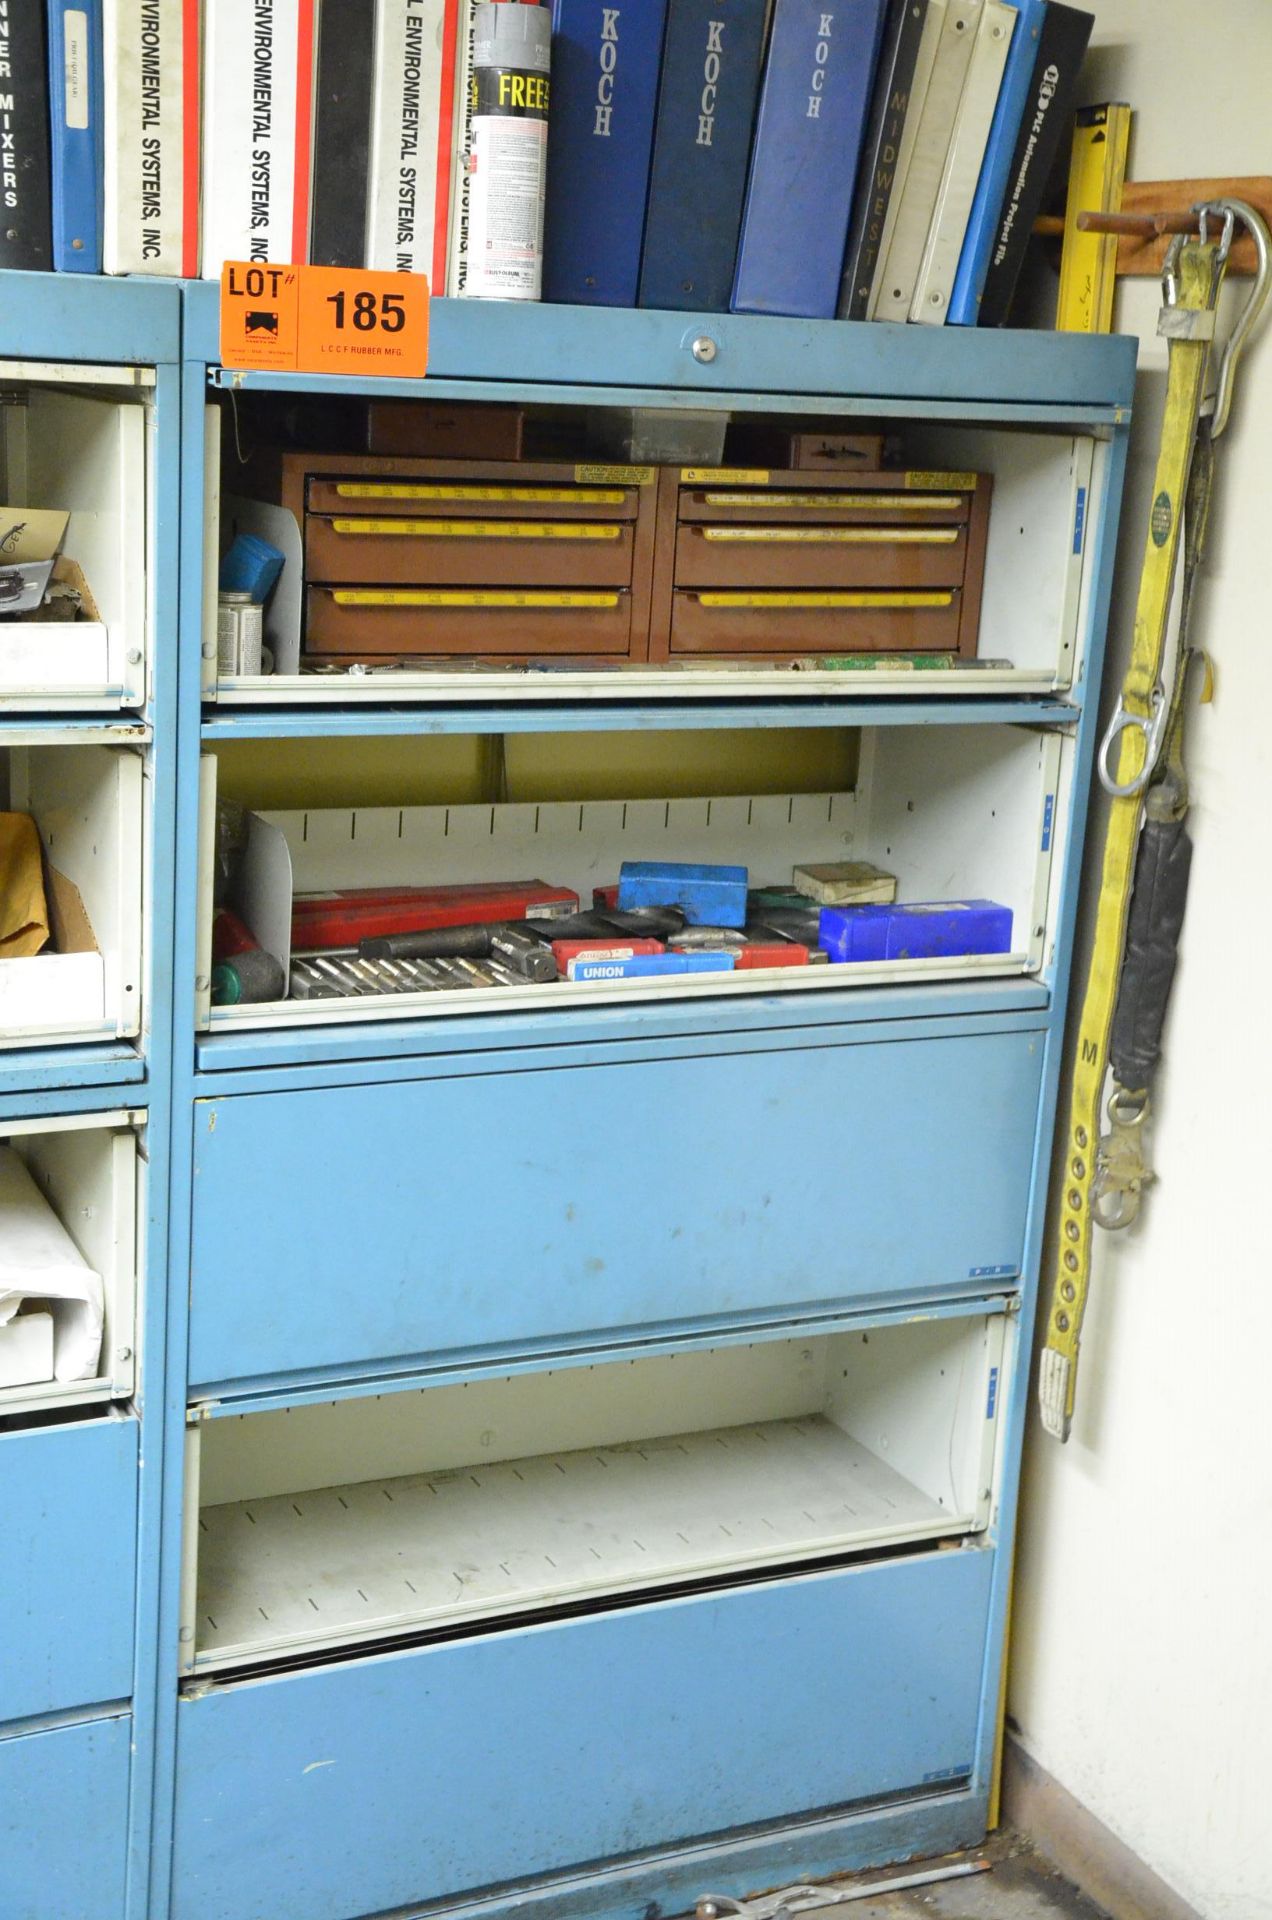 LOT/ CABINET WITH PARTS AND SPARES